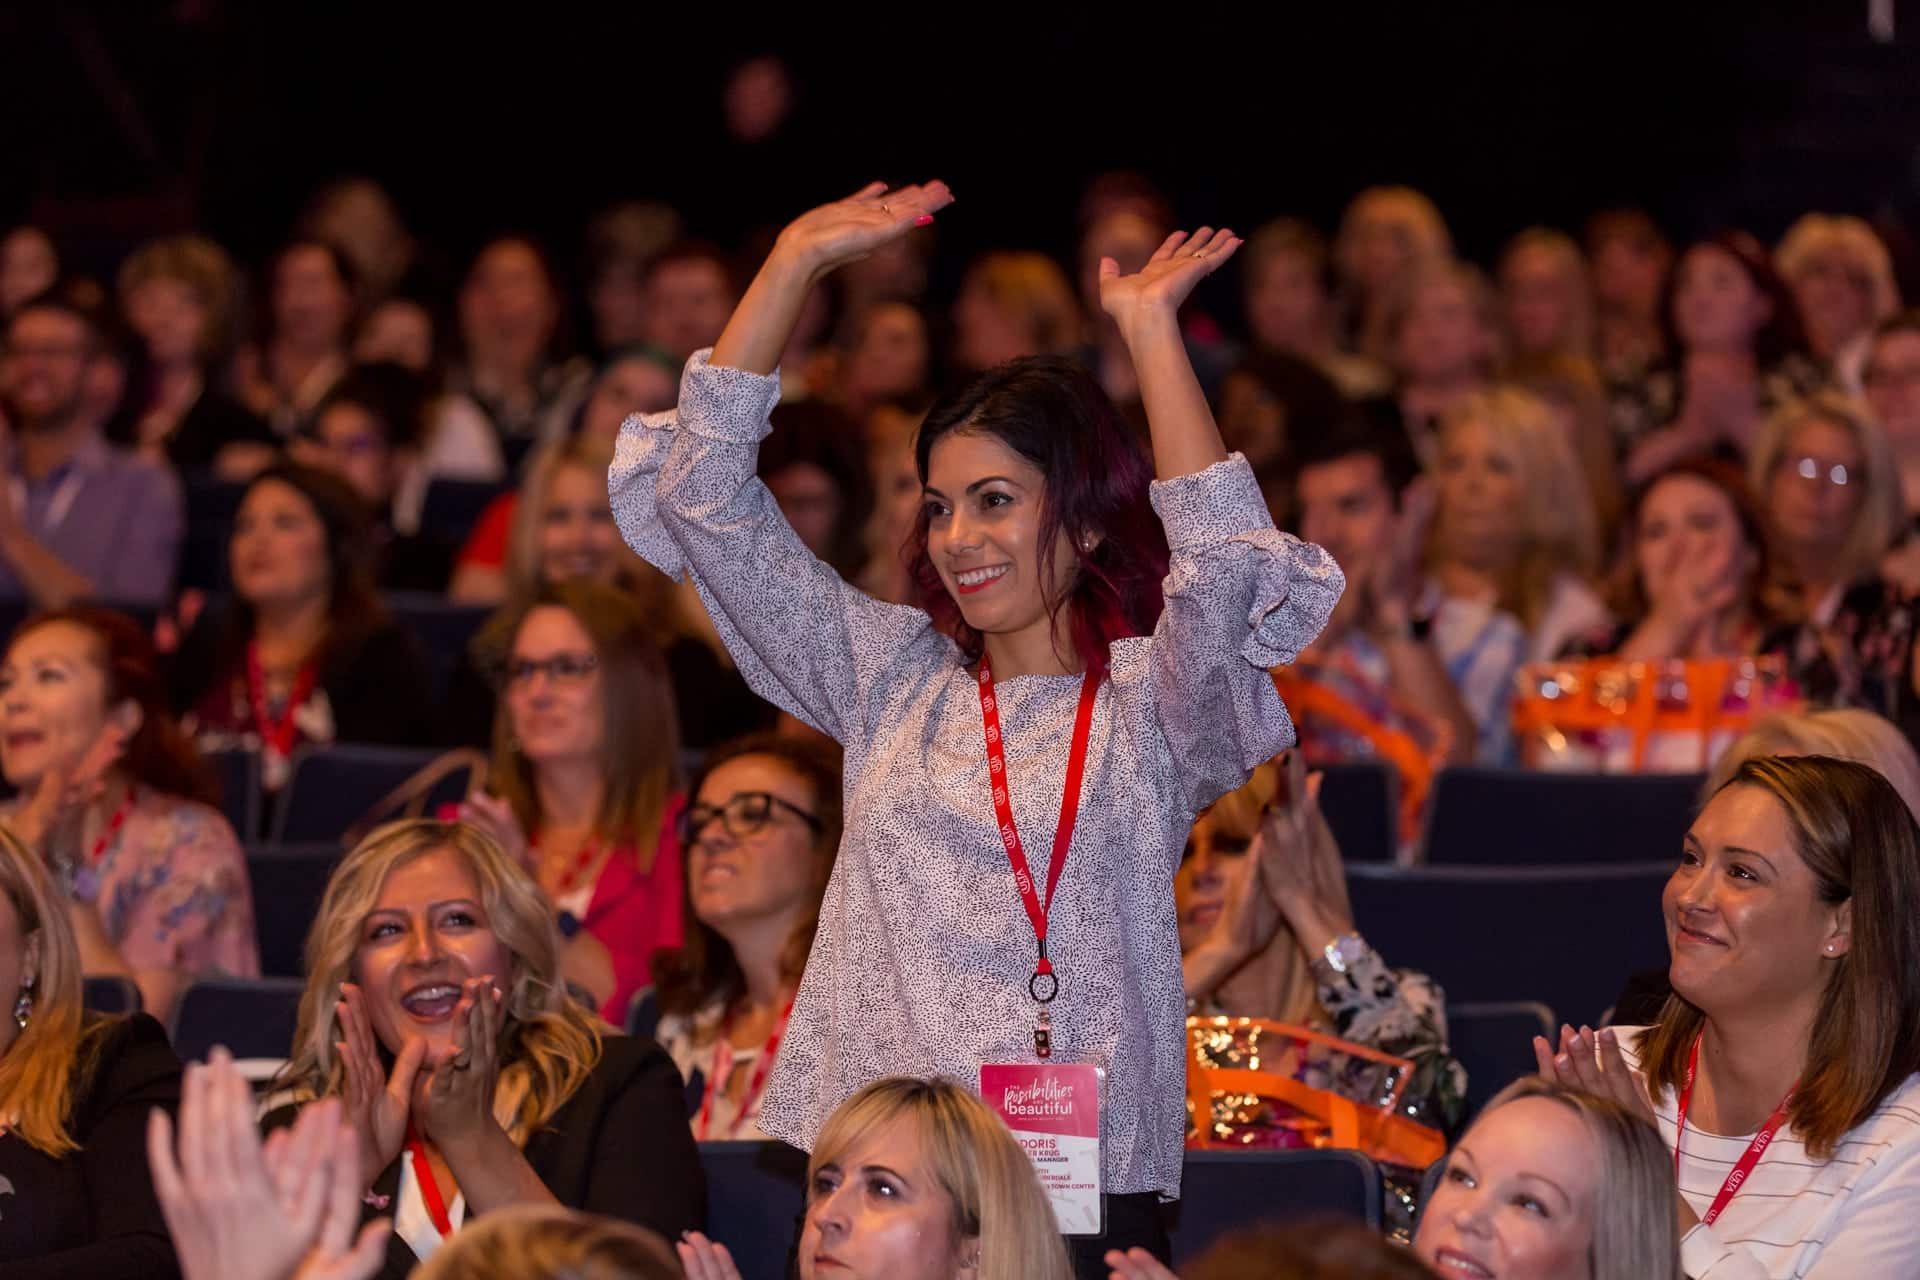 Woman celebrating during a breakout session icebreaker at a corporate event